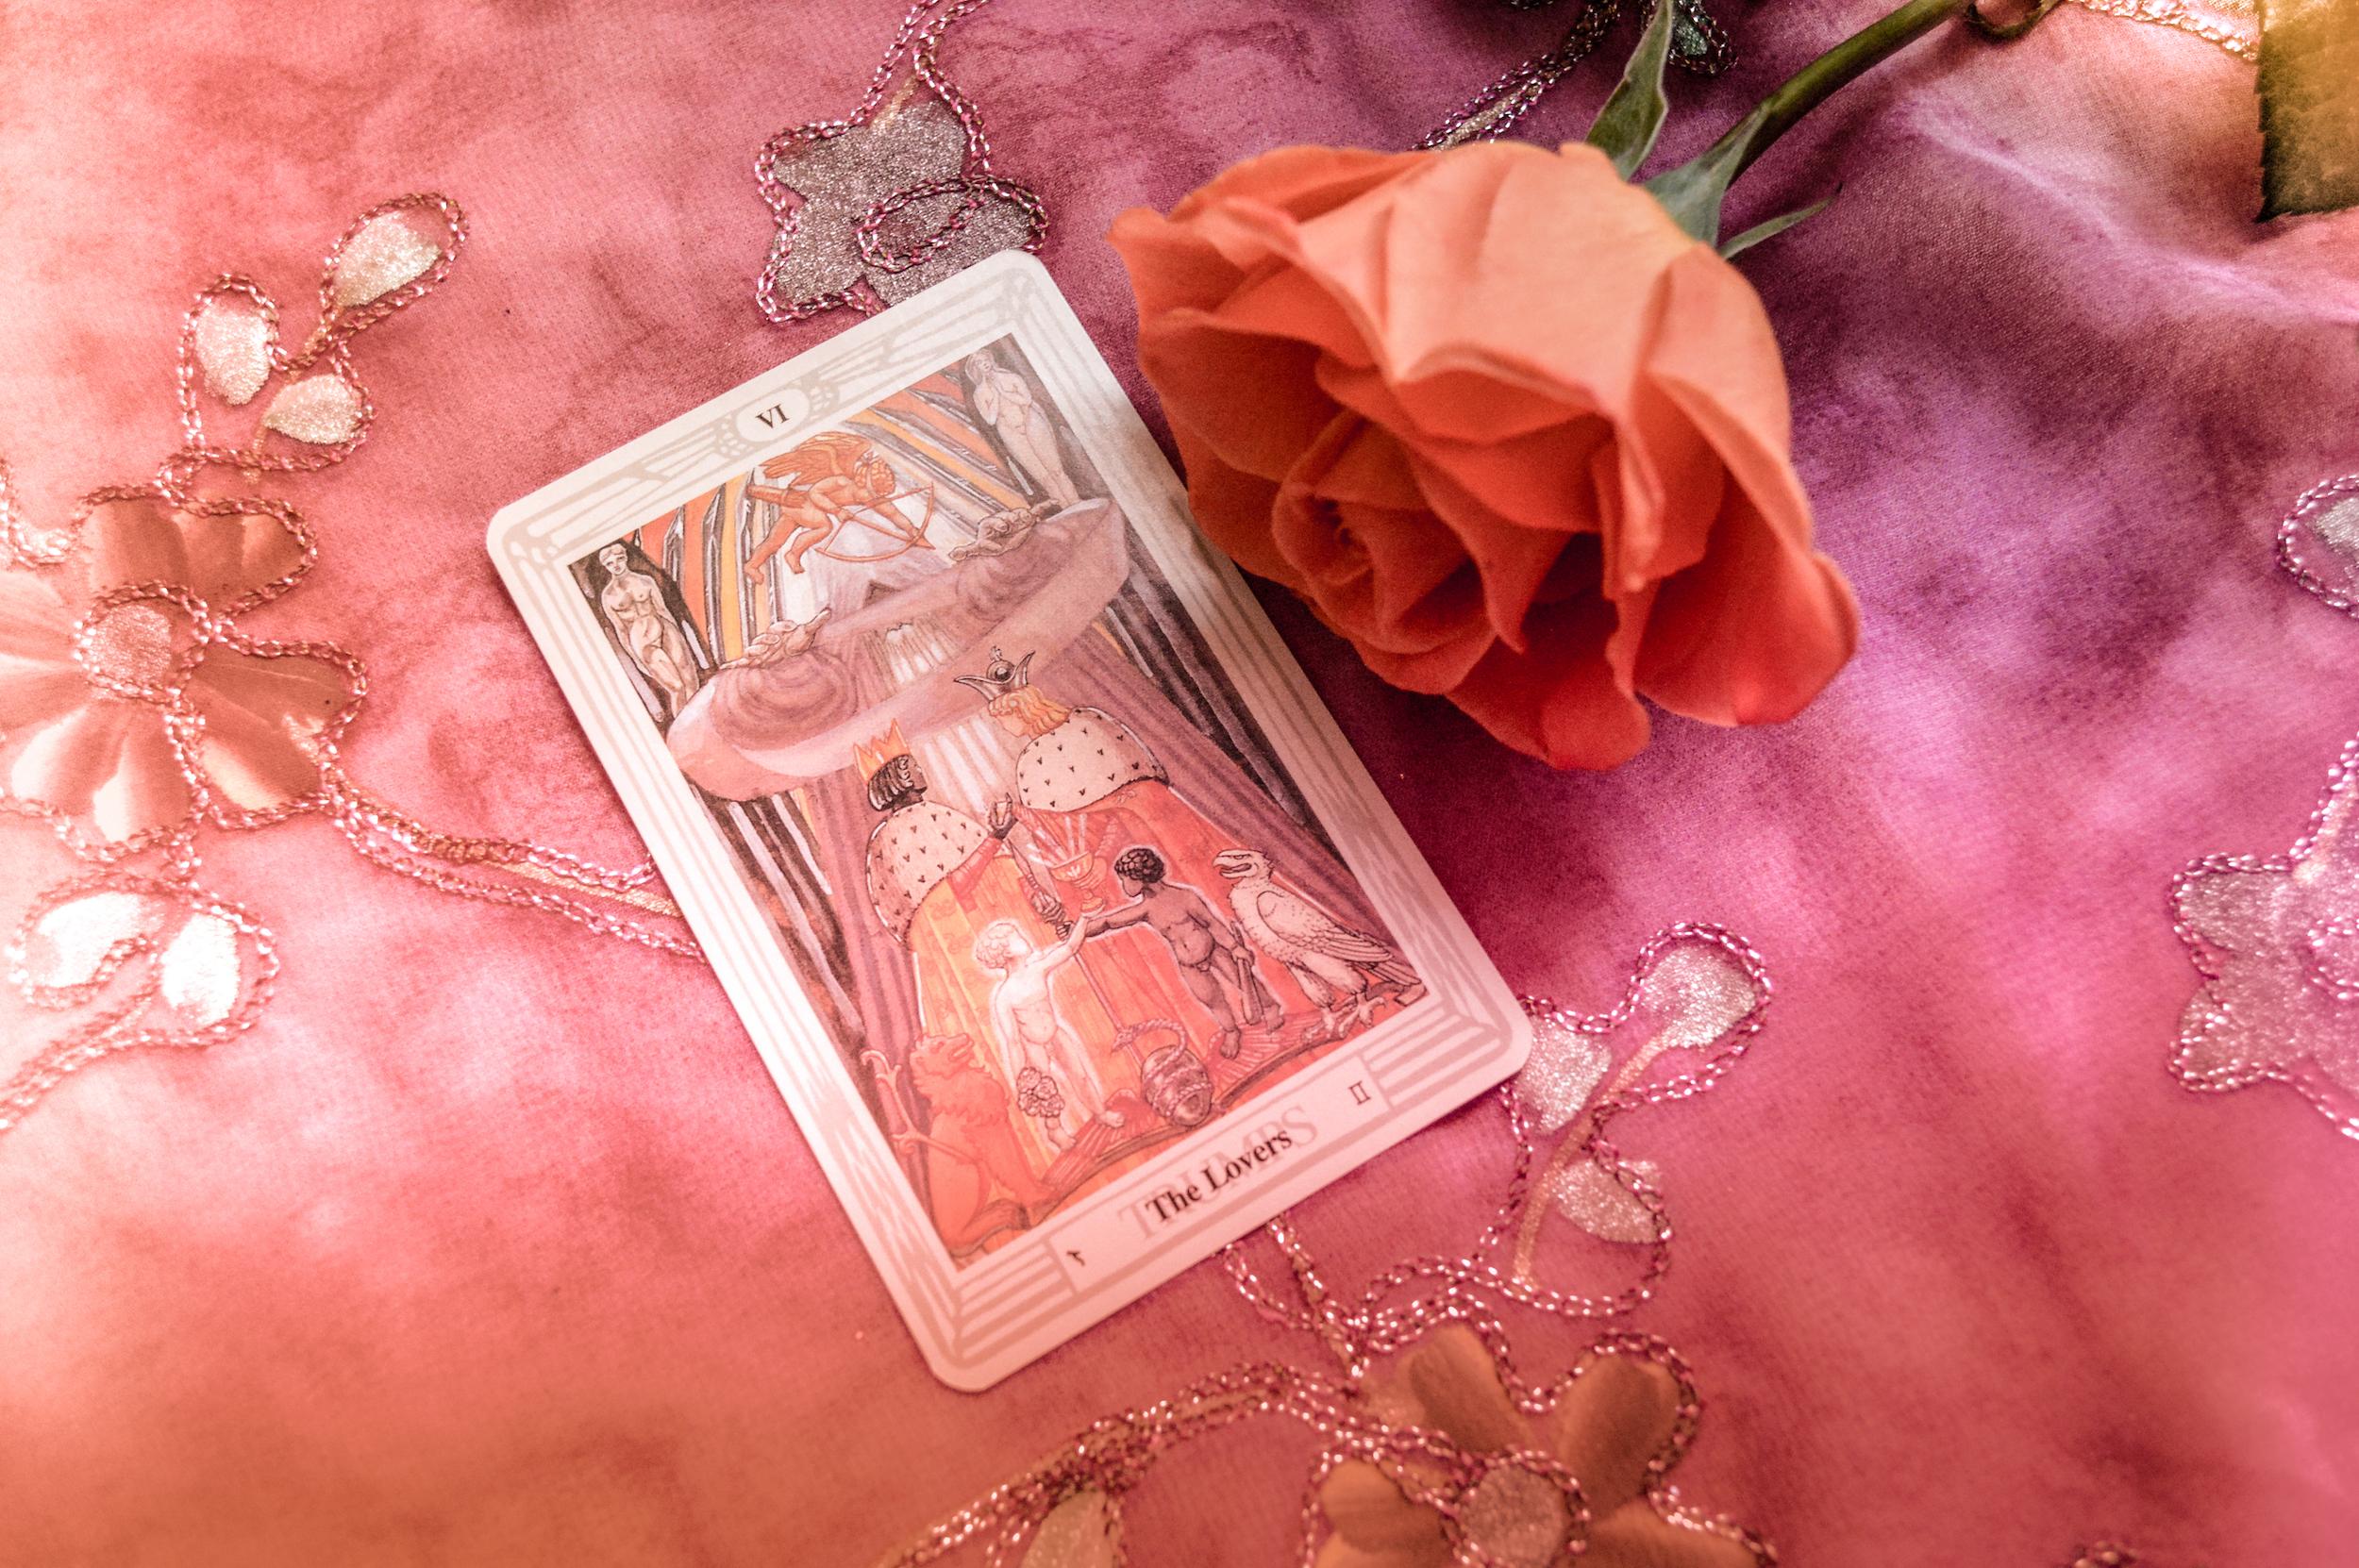 Gemini power card: The Lovers. Soul connections. Choices. Balancing of opposites to create wholeness. Honest communication